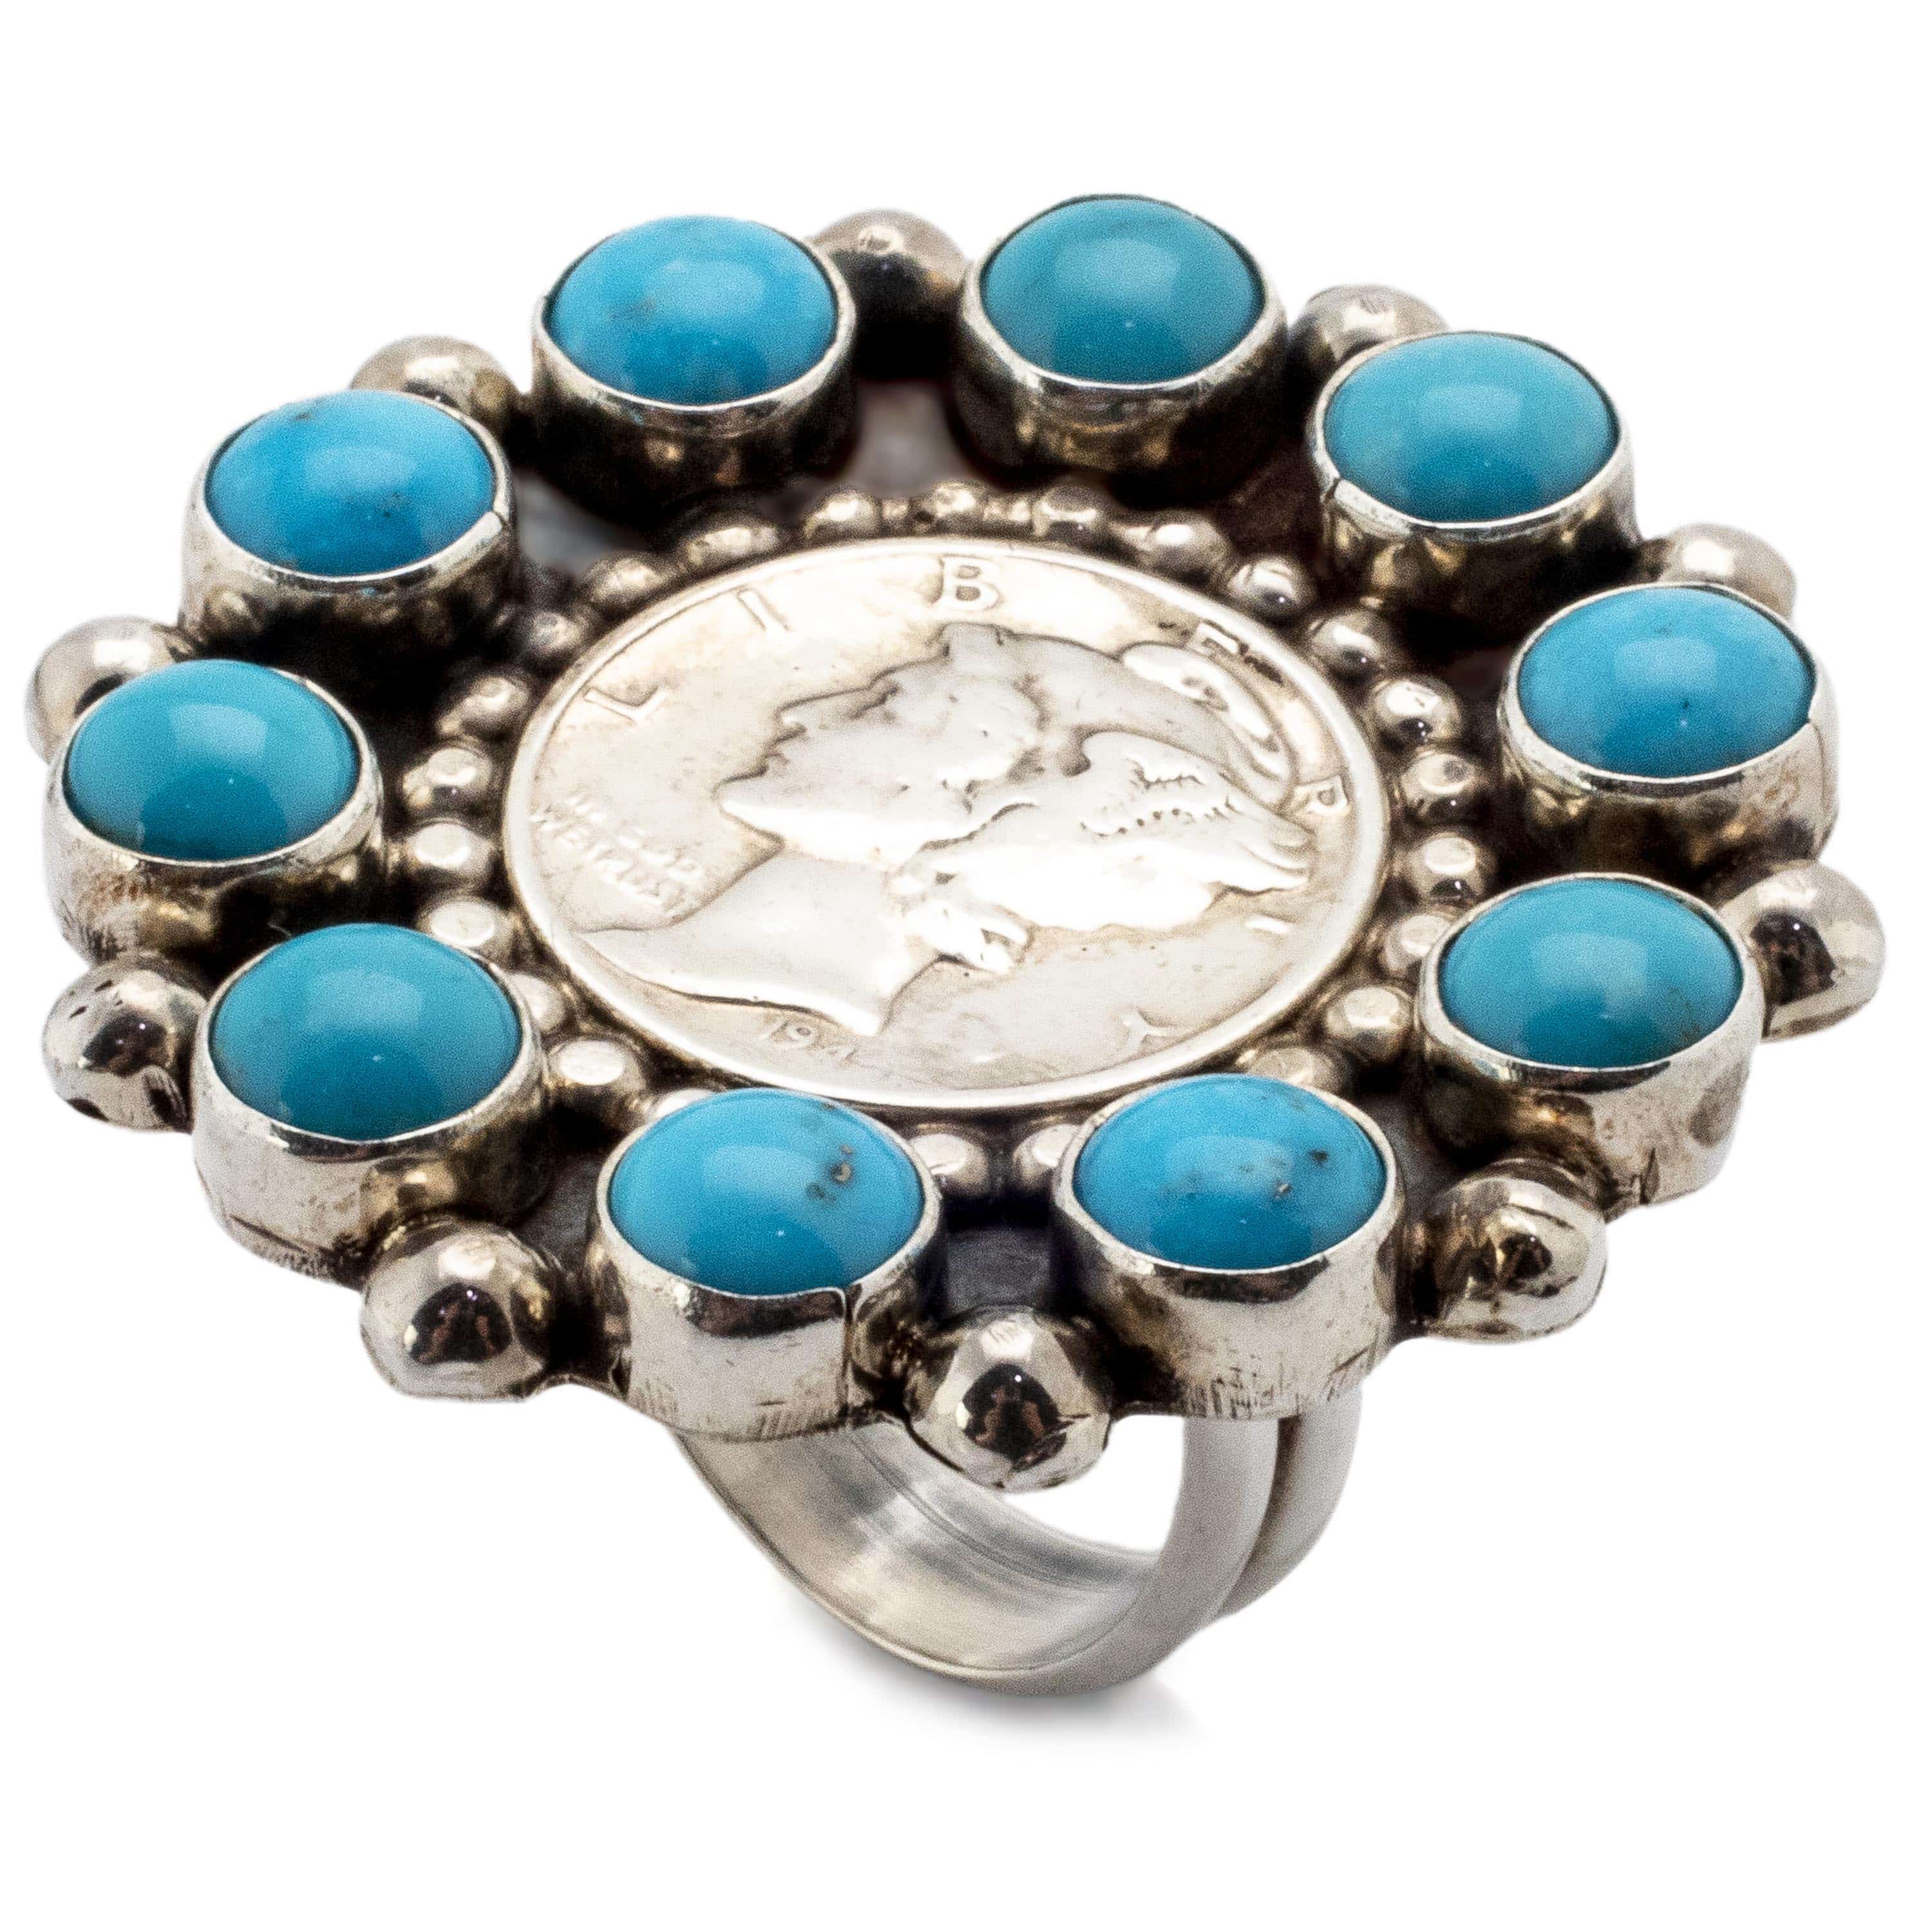 Kalifano Native American Jewelry 8 Kingman Turquoise Liberty Coin USA Native American Made 925 Sterling Silver Adaptive Ring NAR1200.034.8